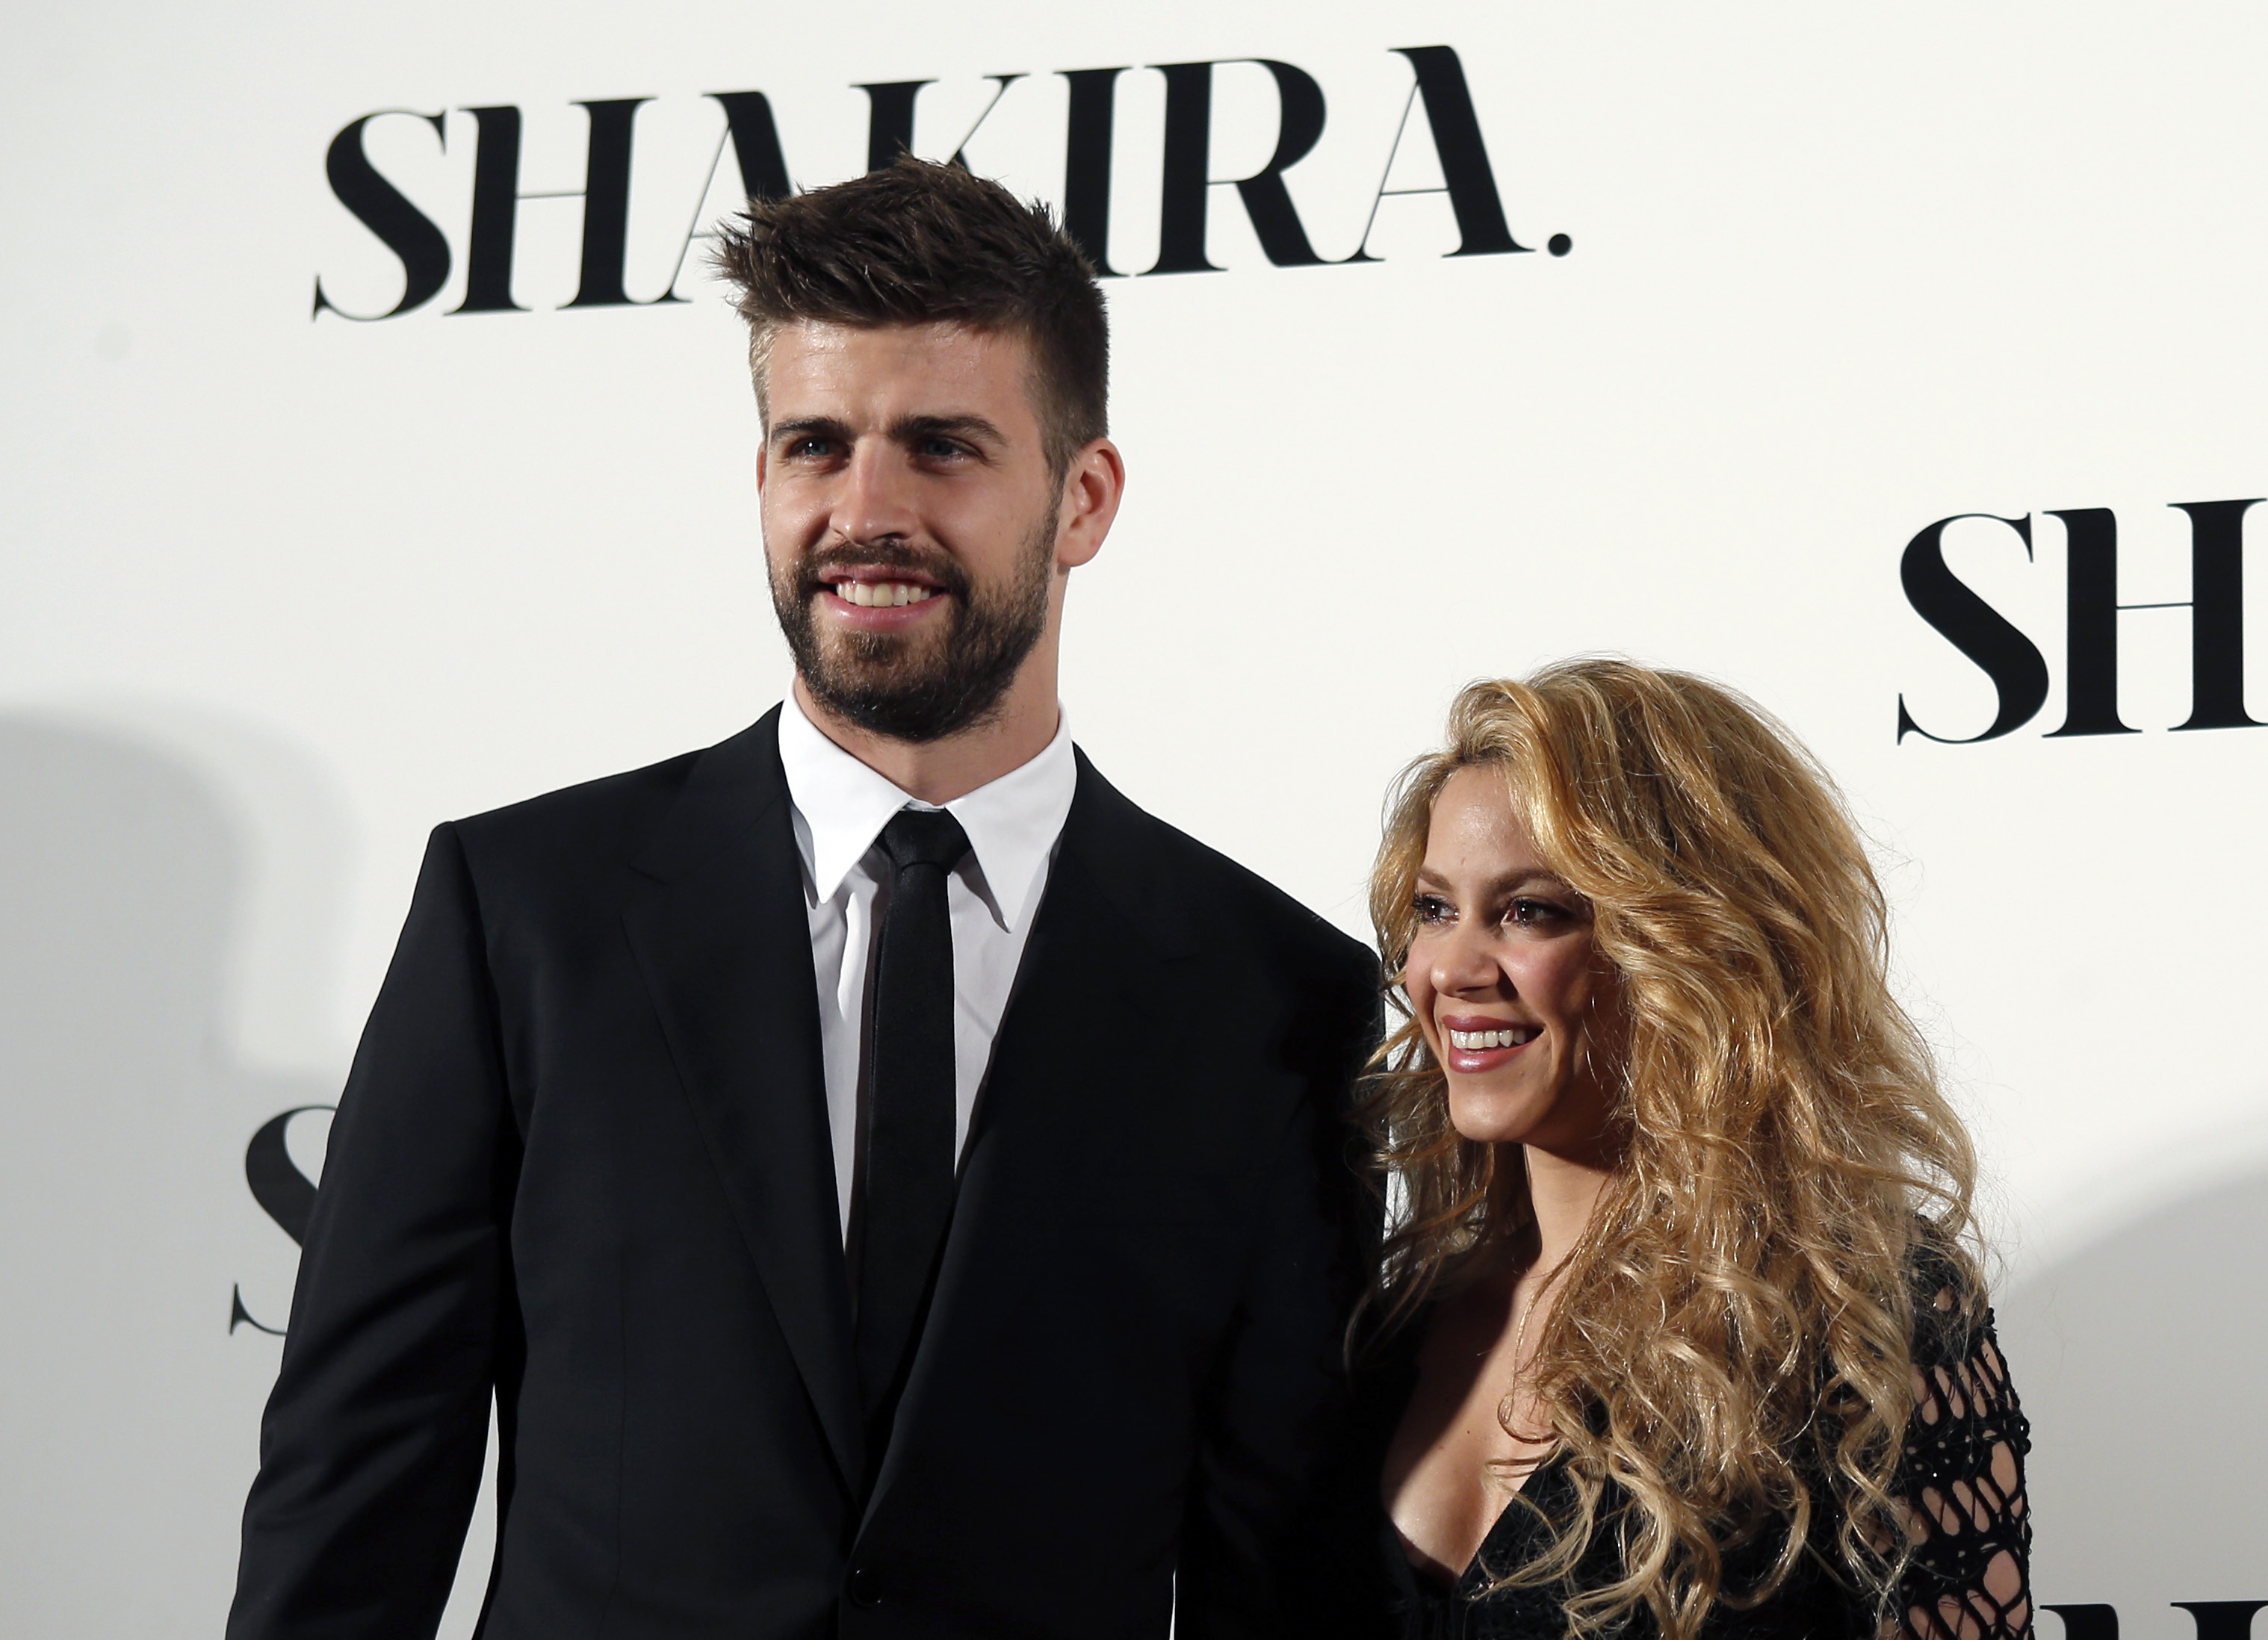 Colombian singer Shakira and FC Barcelona's soccer player Gerard Pique pose during a photocall presenting her new album "Shakira" in Barcelona